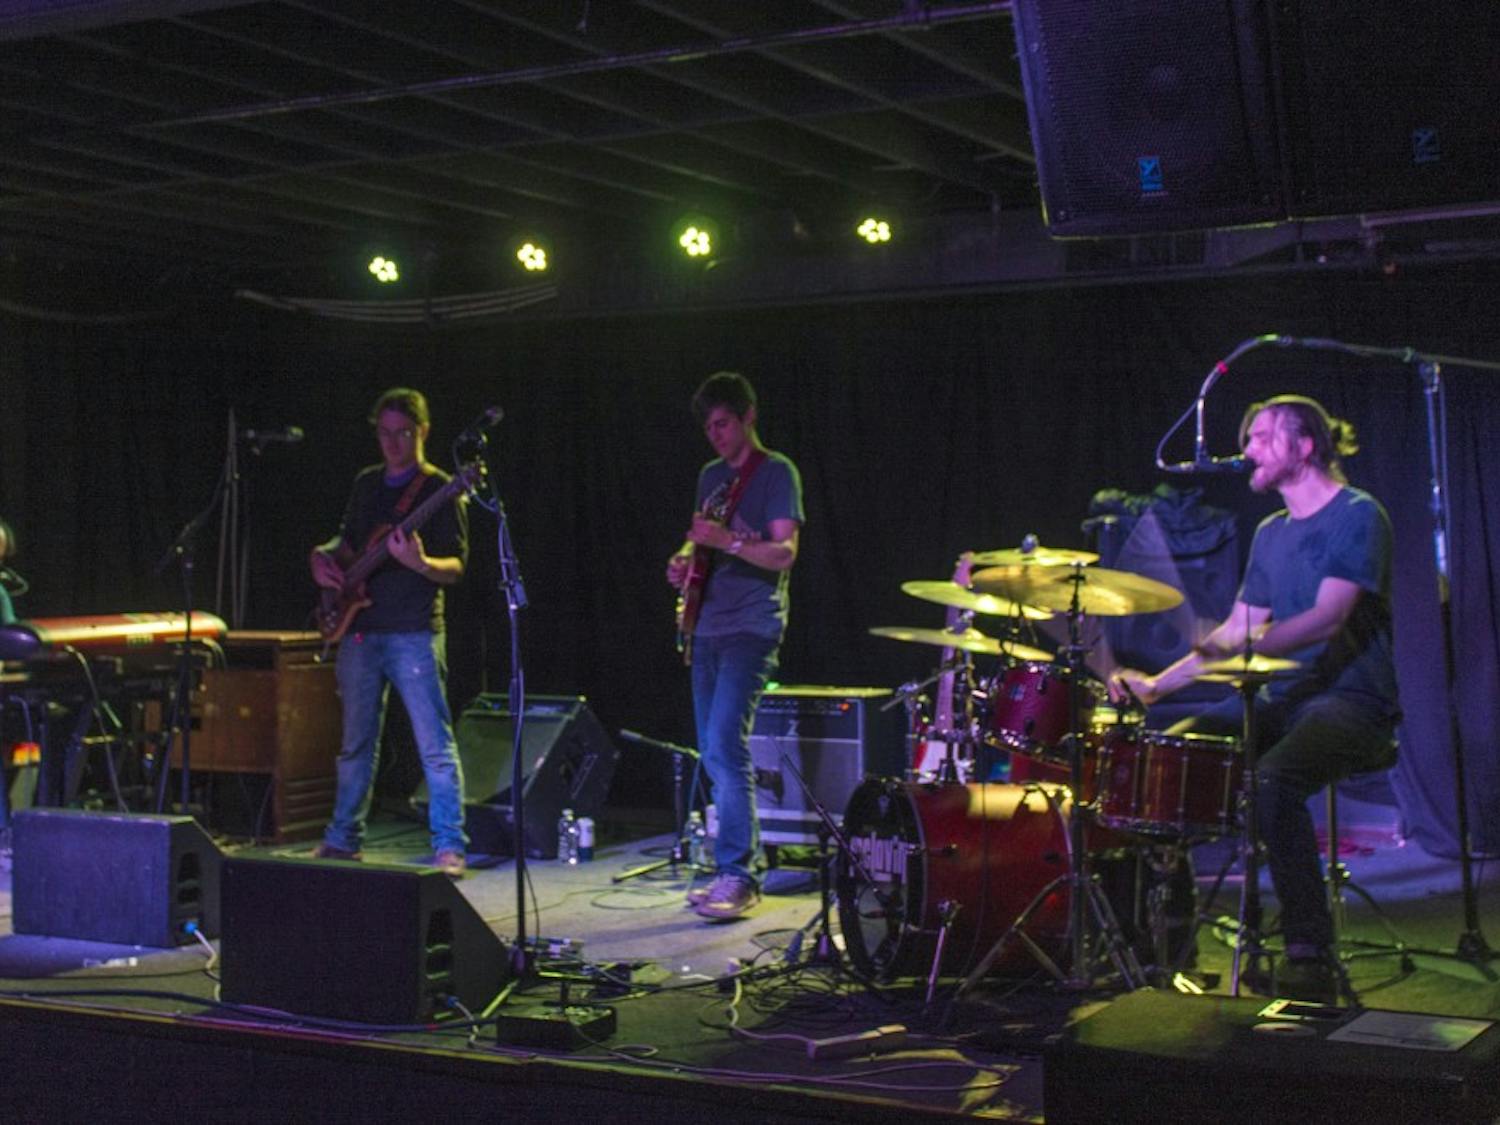 The McLovins played in Buffalo on Saturday night on the second floor of the Waiting Room. The rock band showed off their softer side with a night full of soul and funk songs - with keyboard, drum and guitar solos abound.